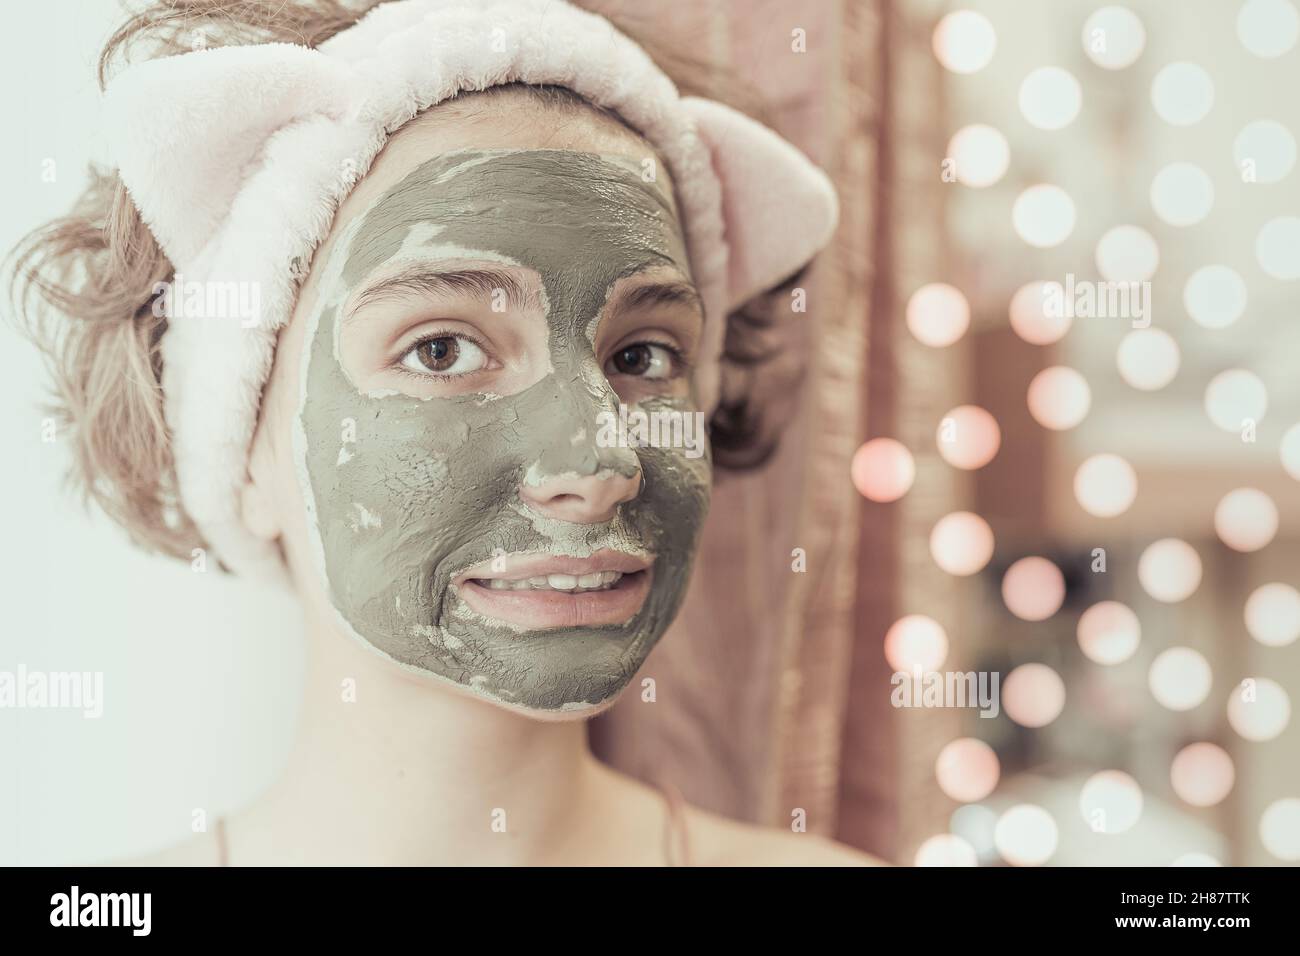 Caucasian model girl teenager in towel on her head wearing cosmetic mask made of green healing clay on blurred background of lights of festive garland Stock Photo